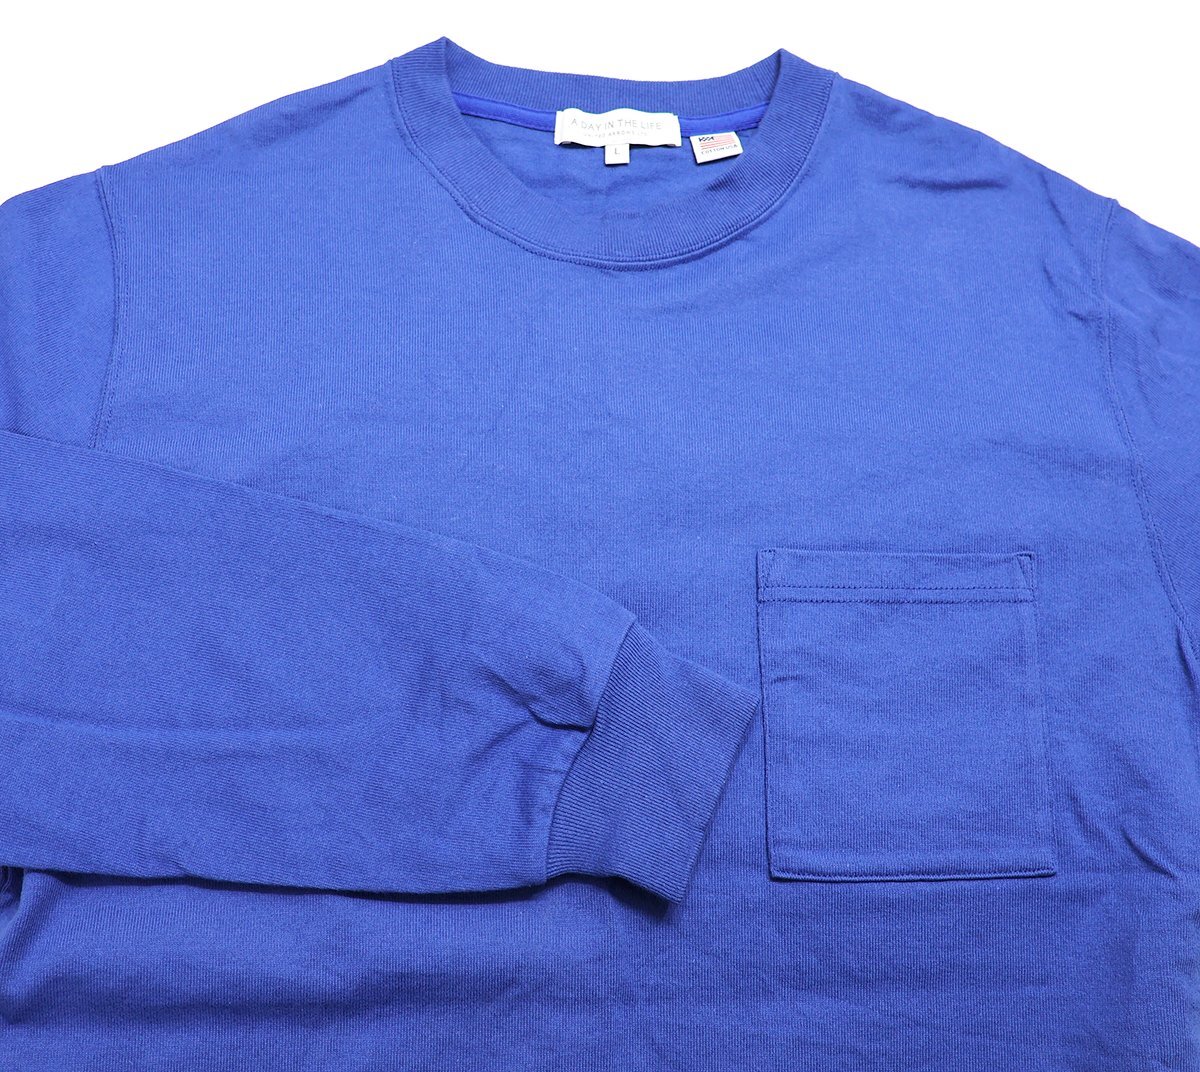 A DAY IN THE LIFE - UNITED ARROWS (ユナイテッドアローズ) Crew Neck L/S Tee / プレーン 長袖Tシャツ ブルー size L / ロンTの画像3